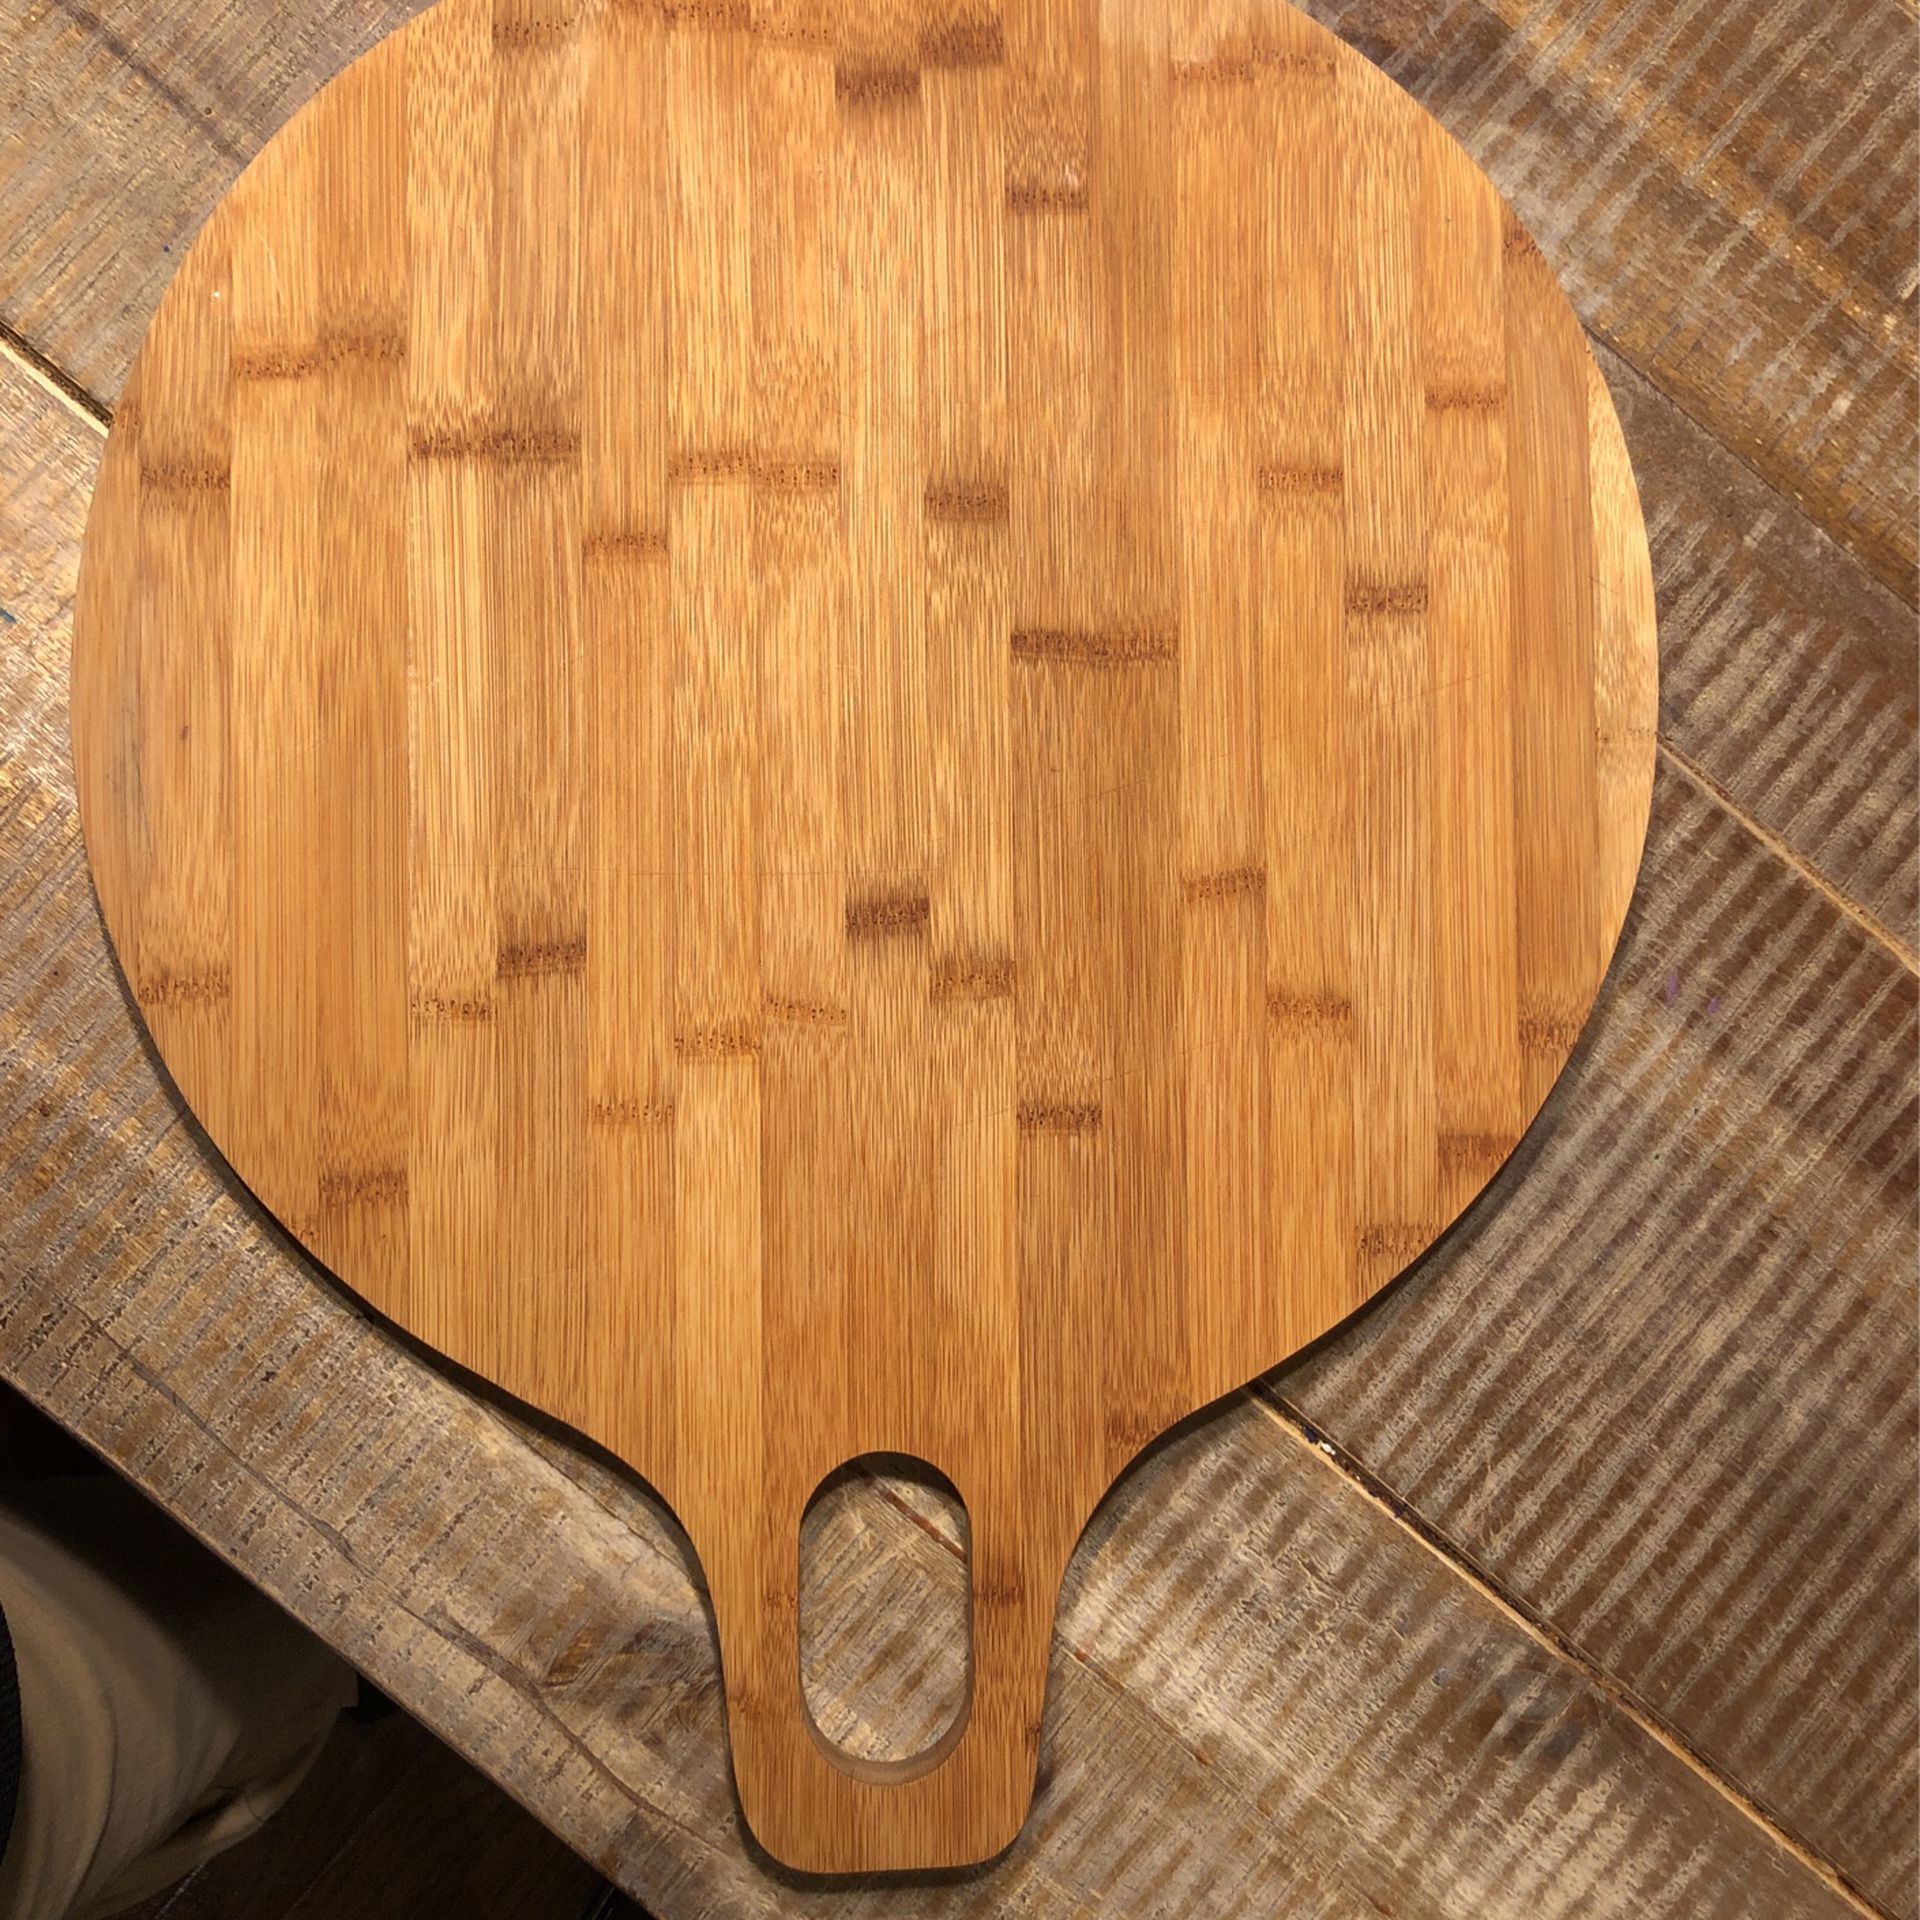 Wood Cutting Board and Red Salad Bowl with Tray